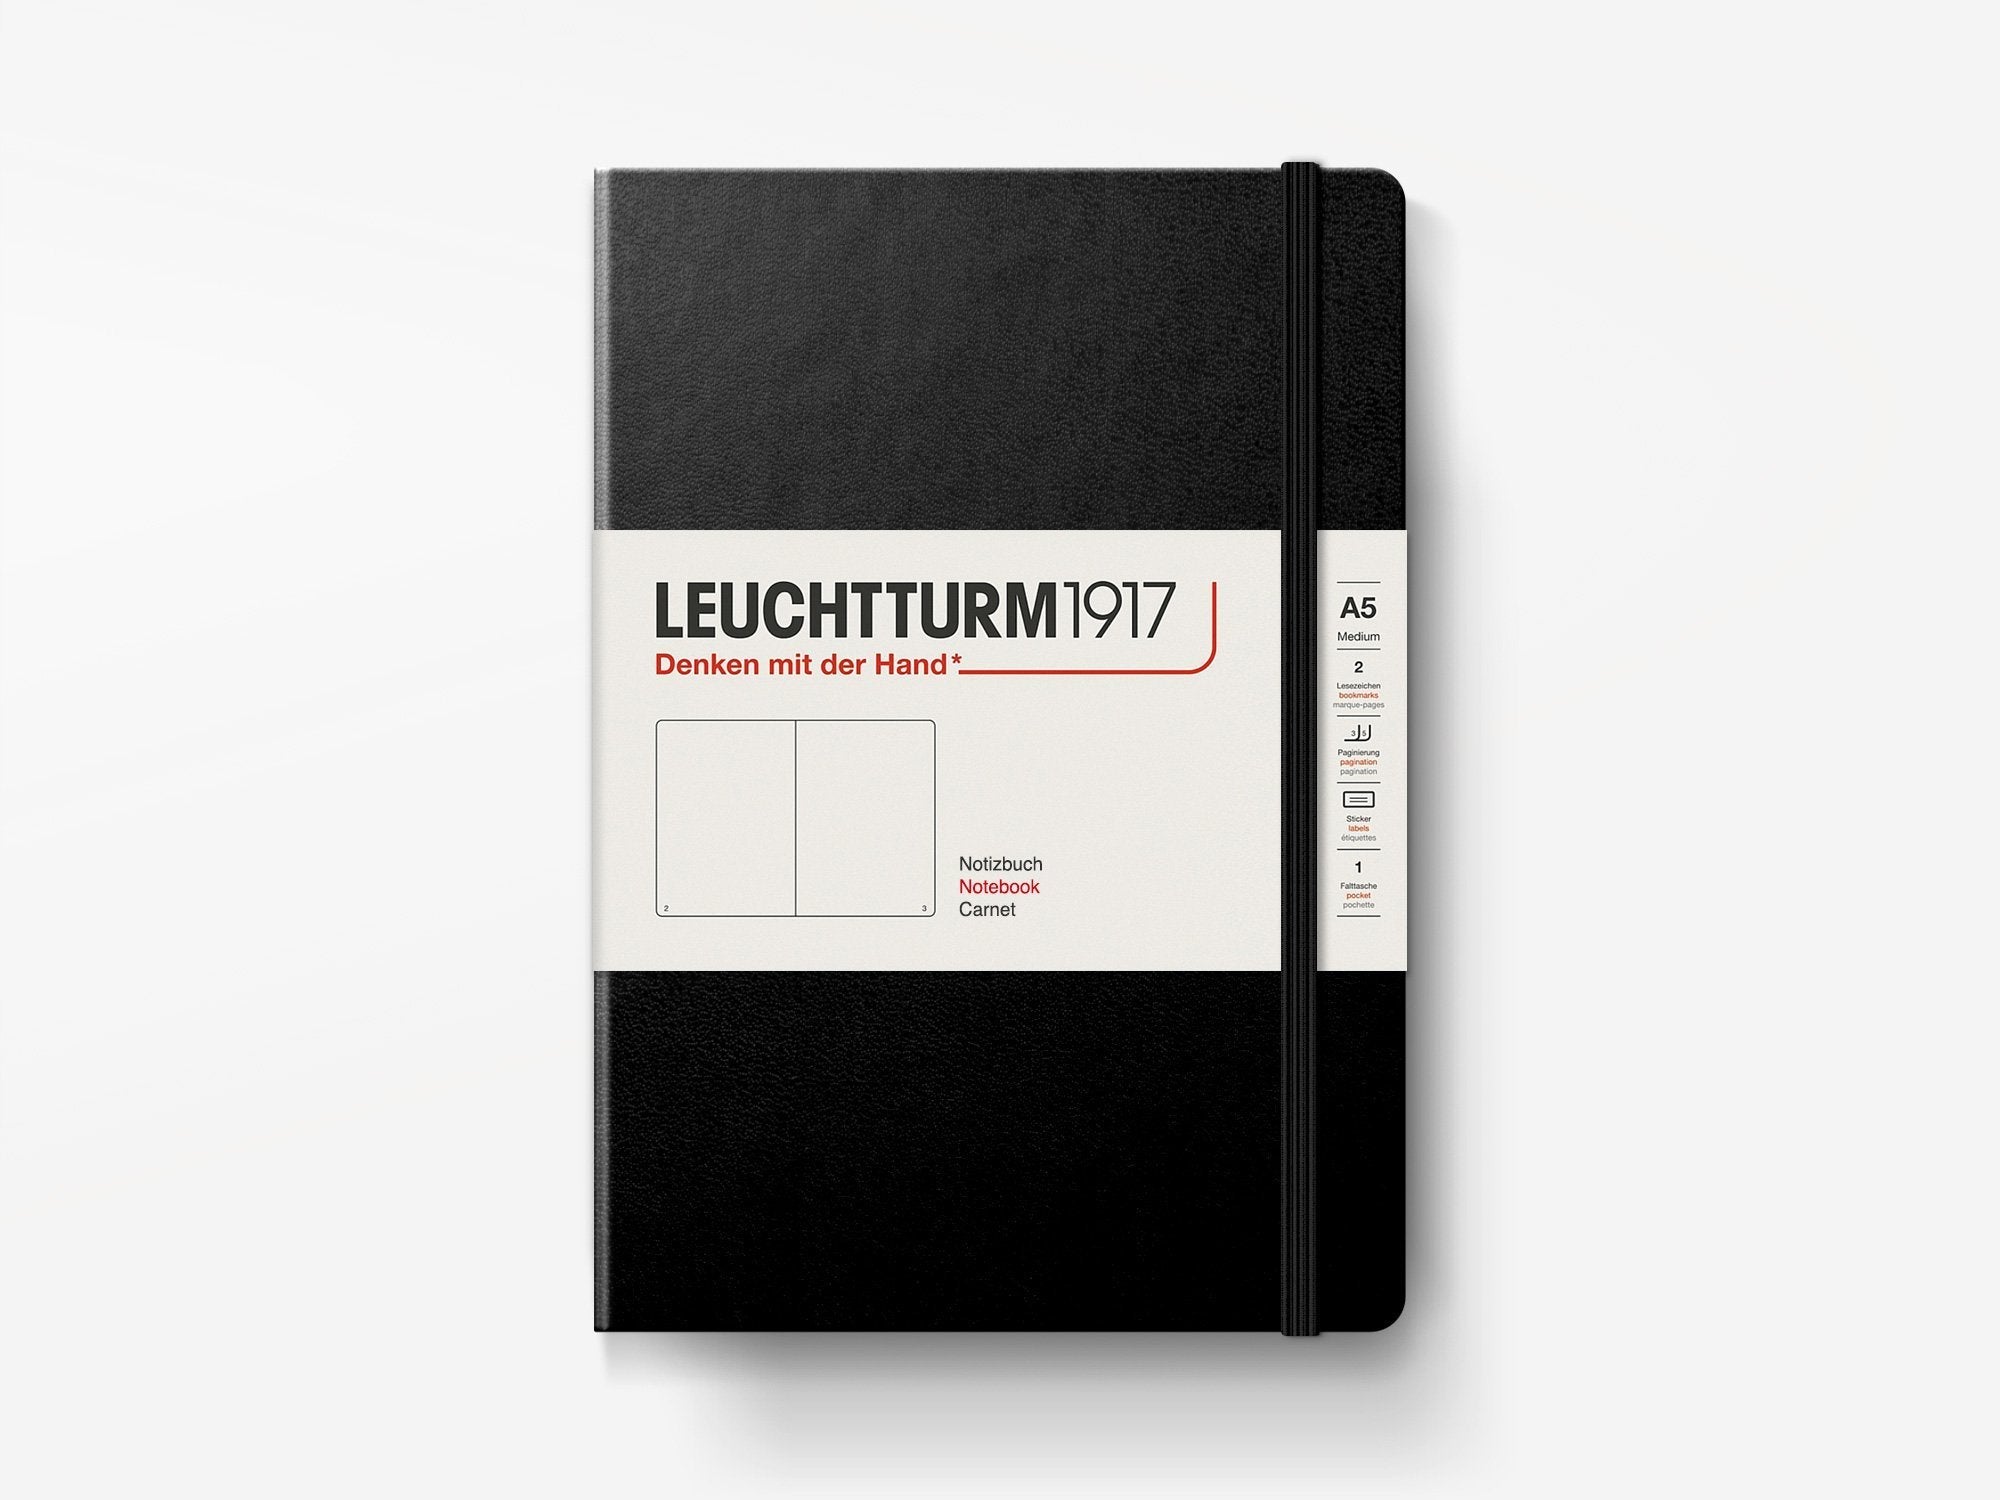 Buy MONOCLE by LEUCHTTURM1917 special edition